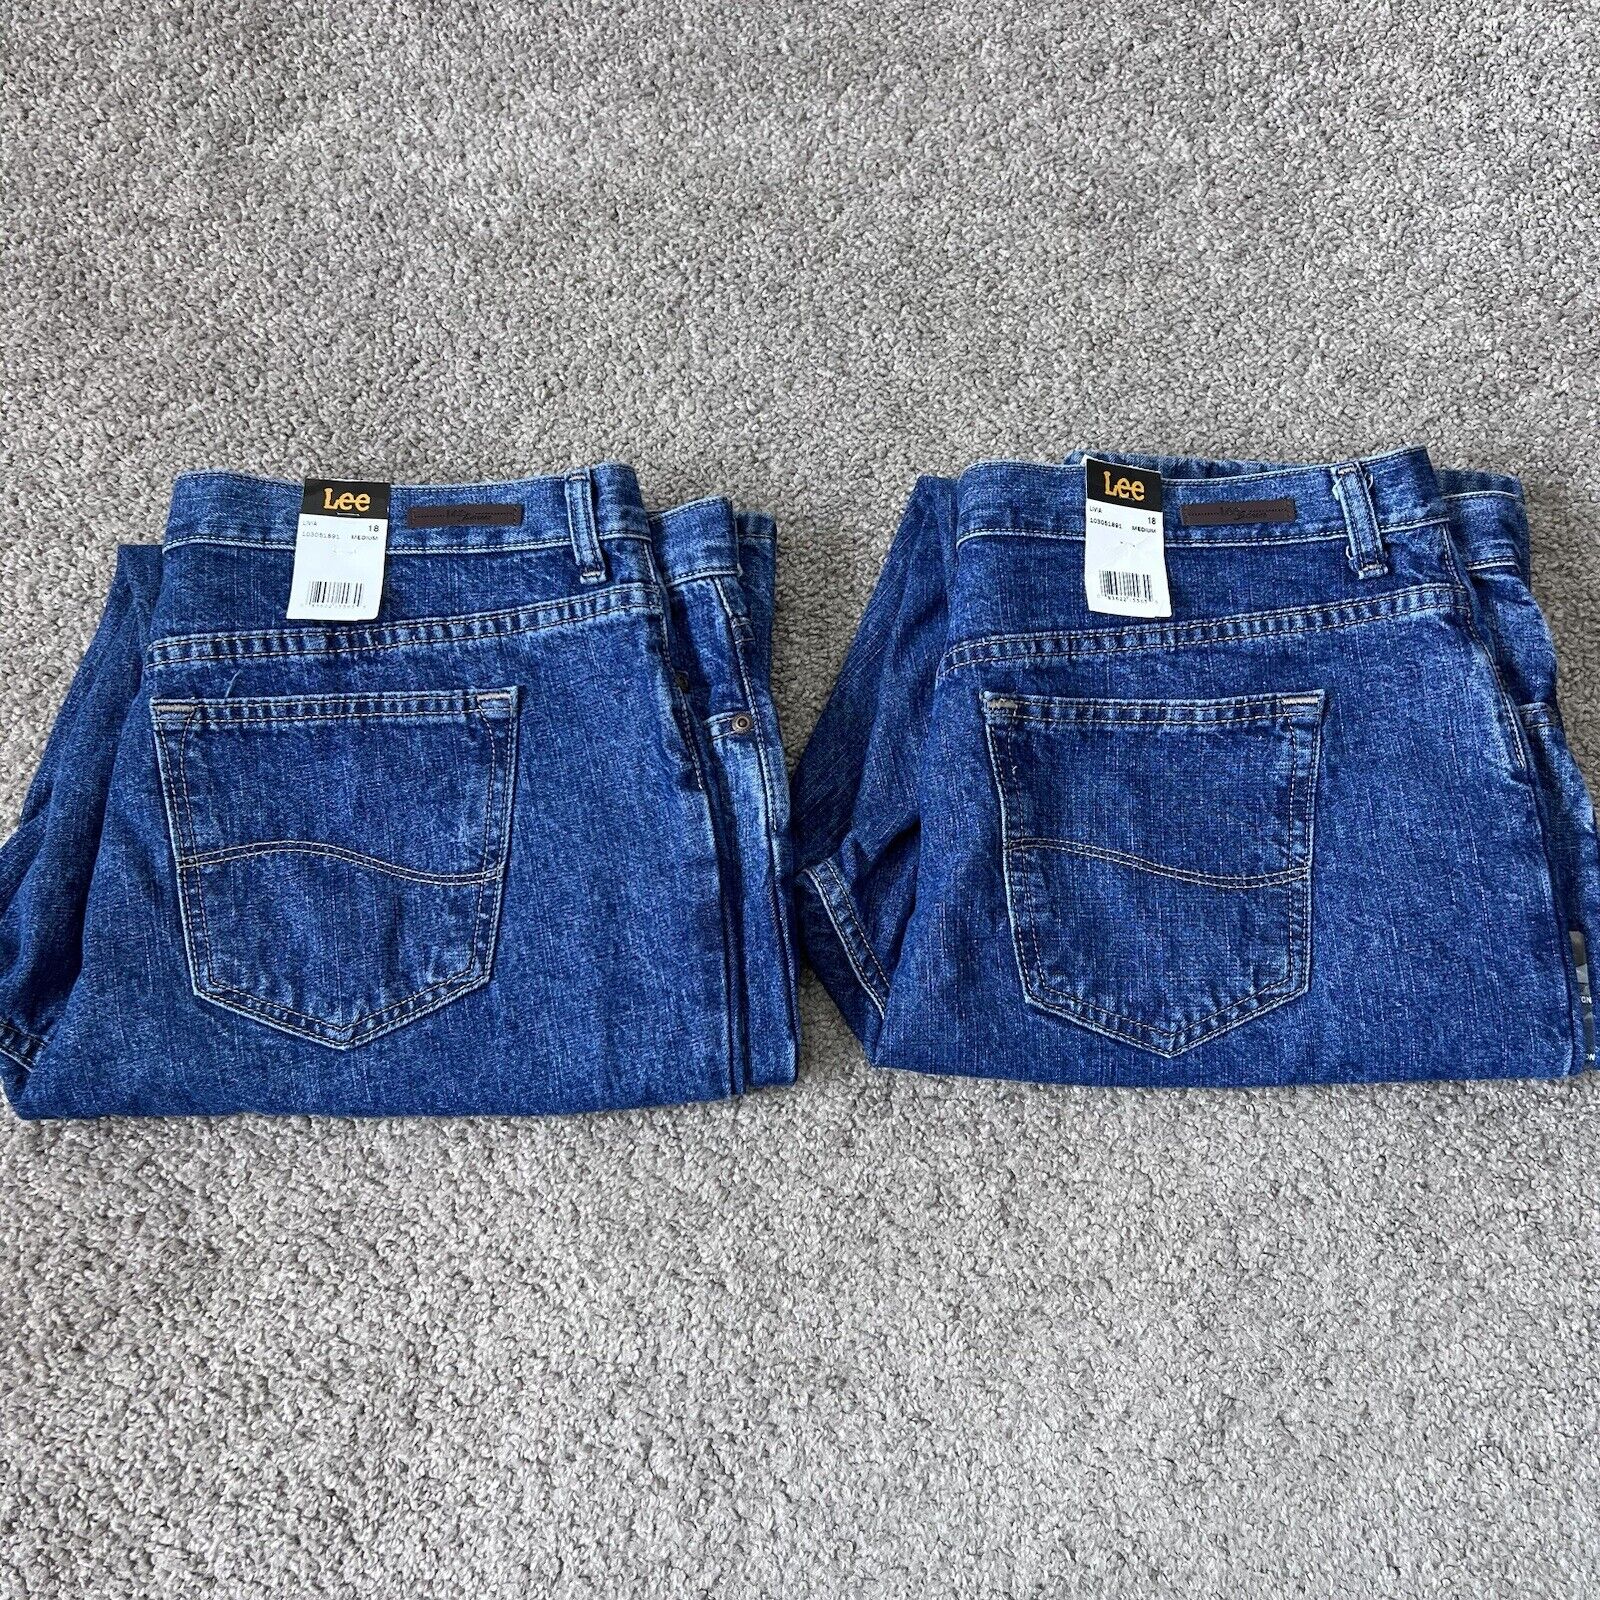 Lee Jeans Womens 18 Médium Relaxed Fit Straight Leg Lot of 2 pieces New with tag